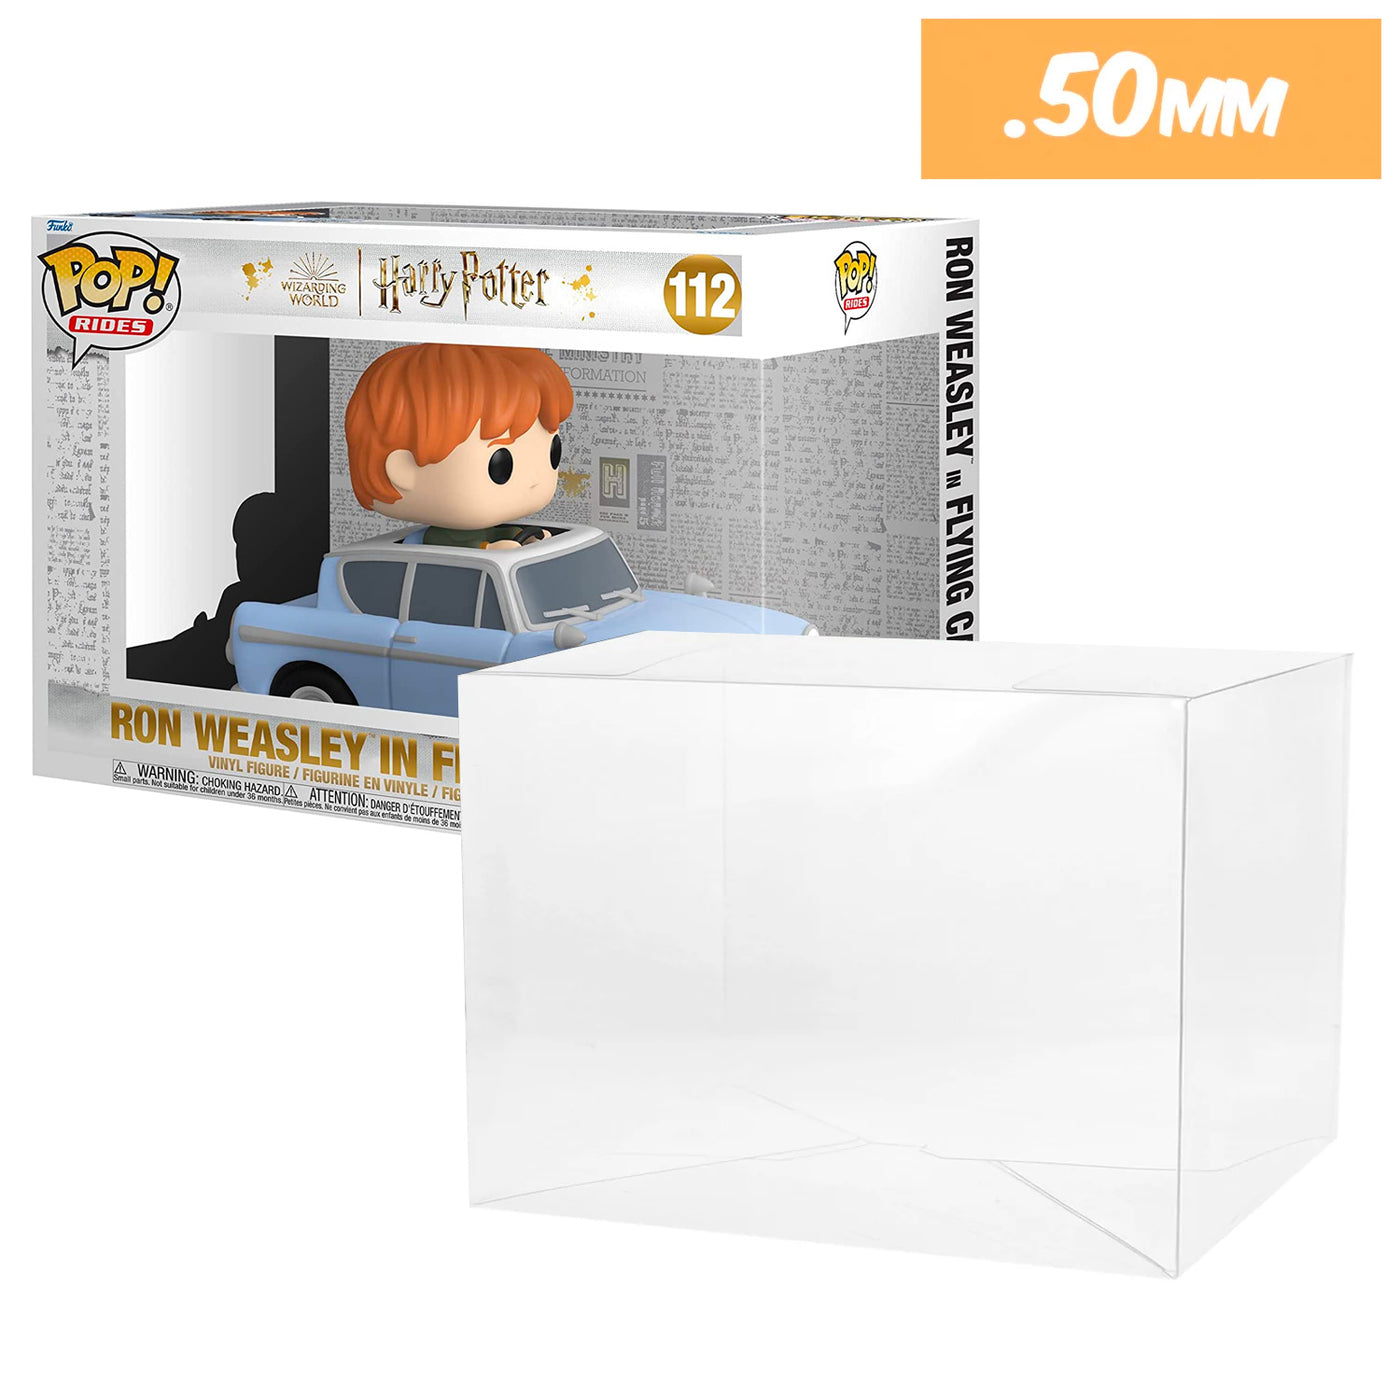 112 ron weasley in flying car pop rides best funko pop protectors thick strong uv scratch flat top stack vinyl display geek plastic shield vaulted eco armor fits collect protect display case kollector